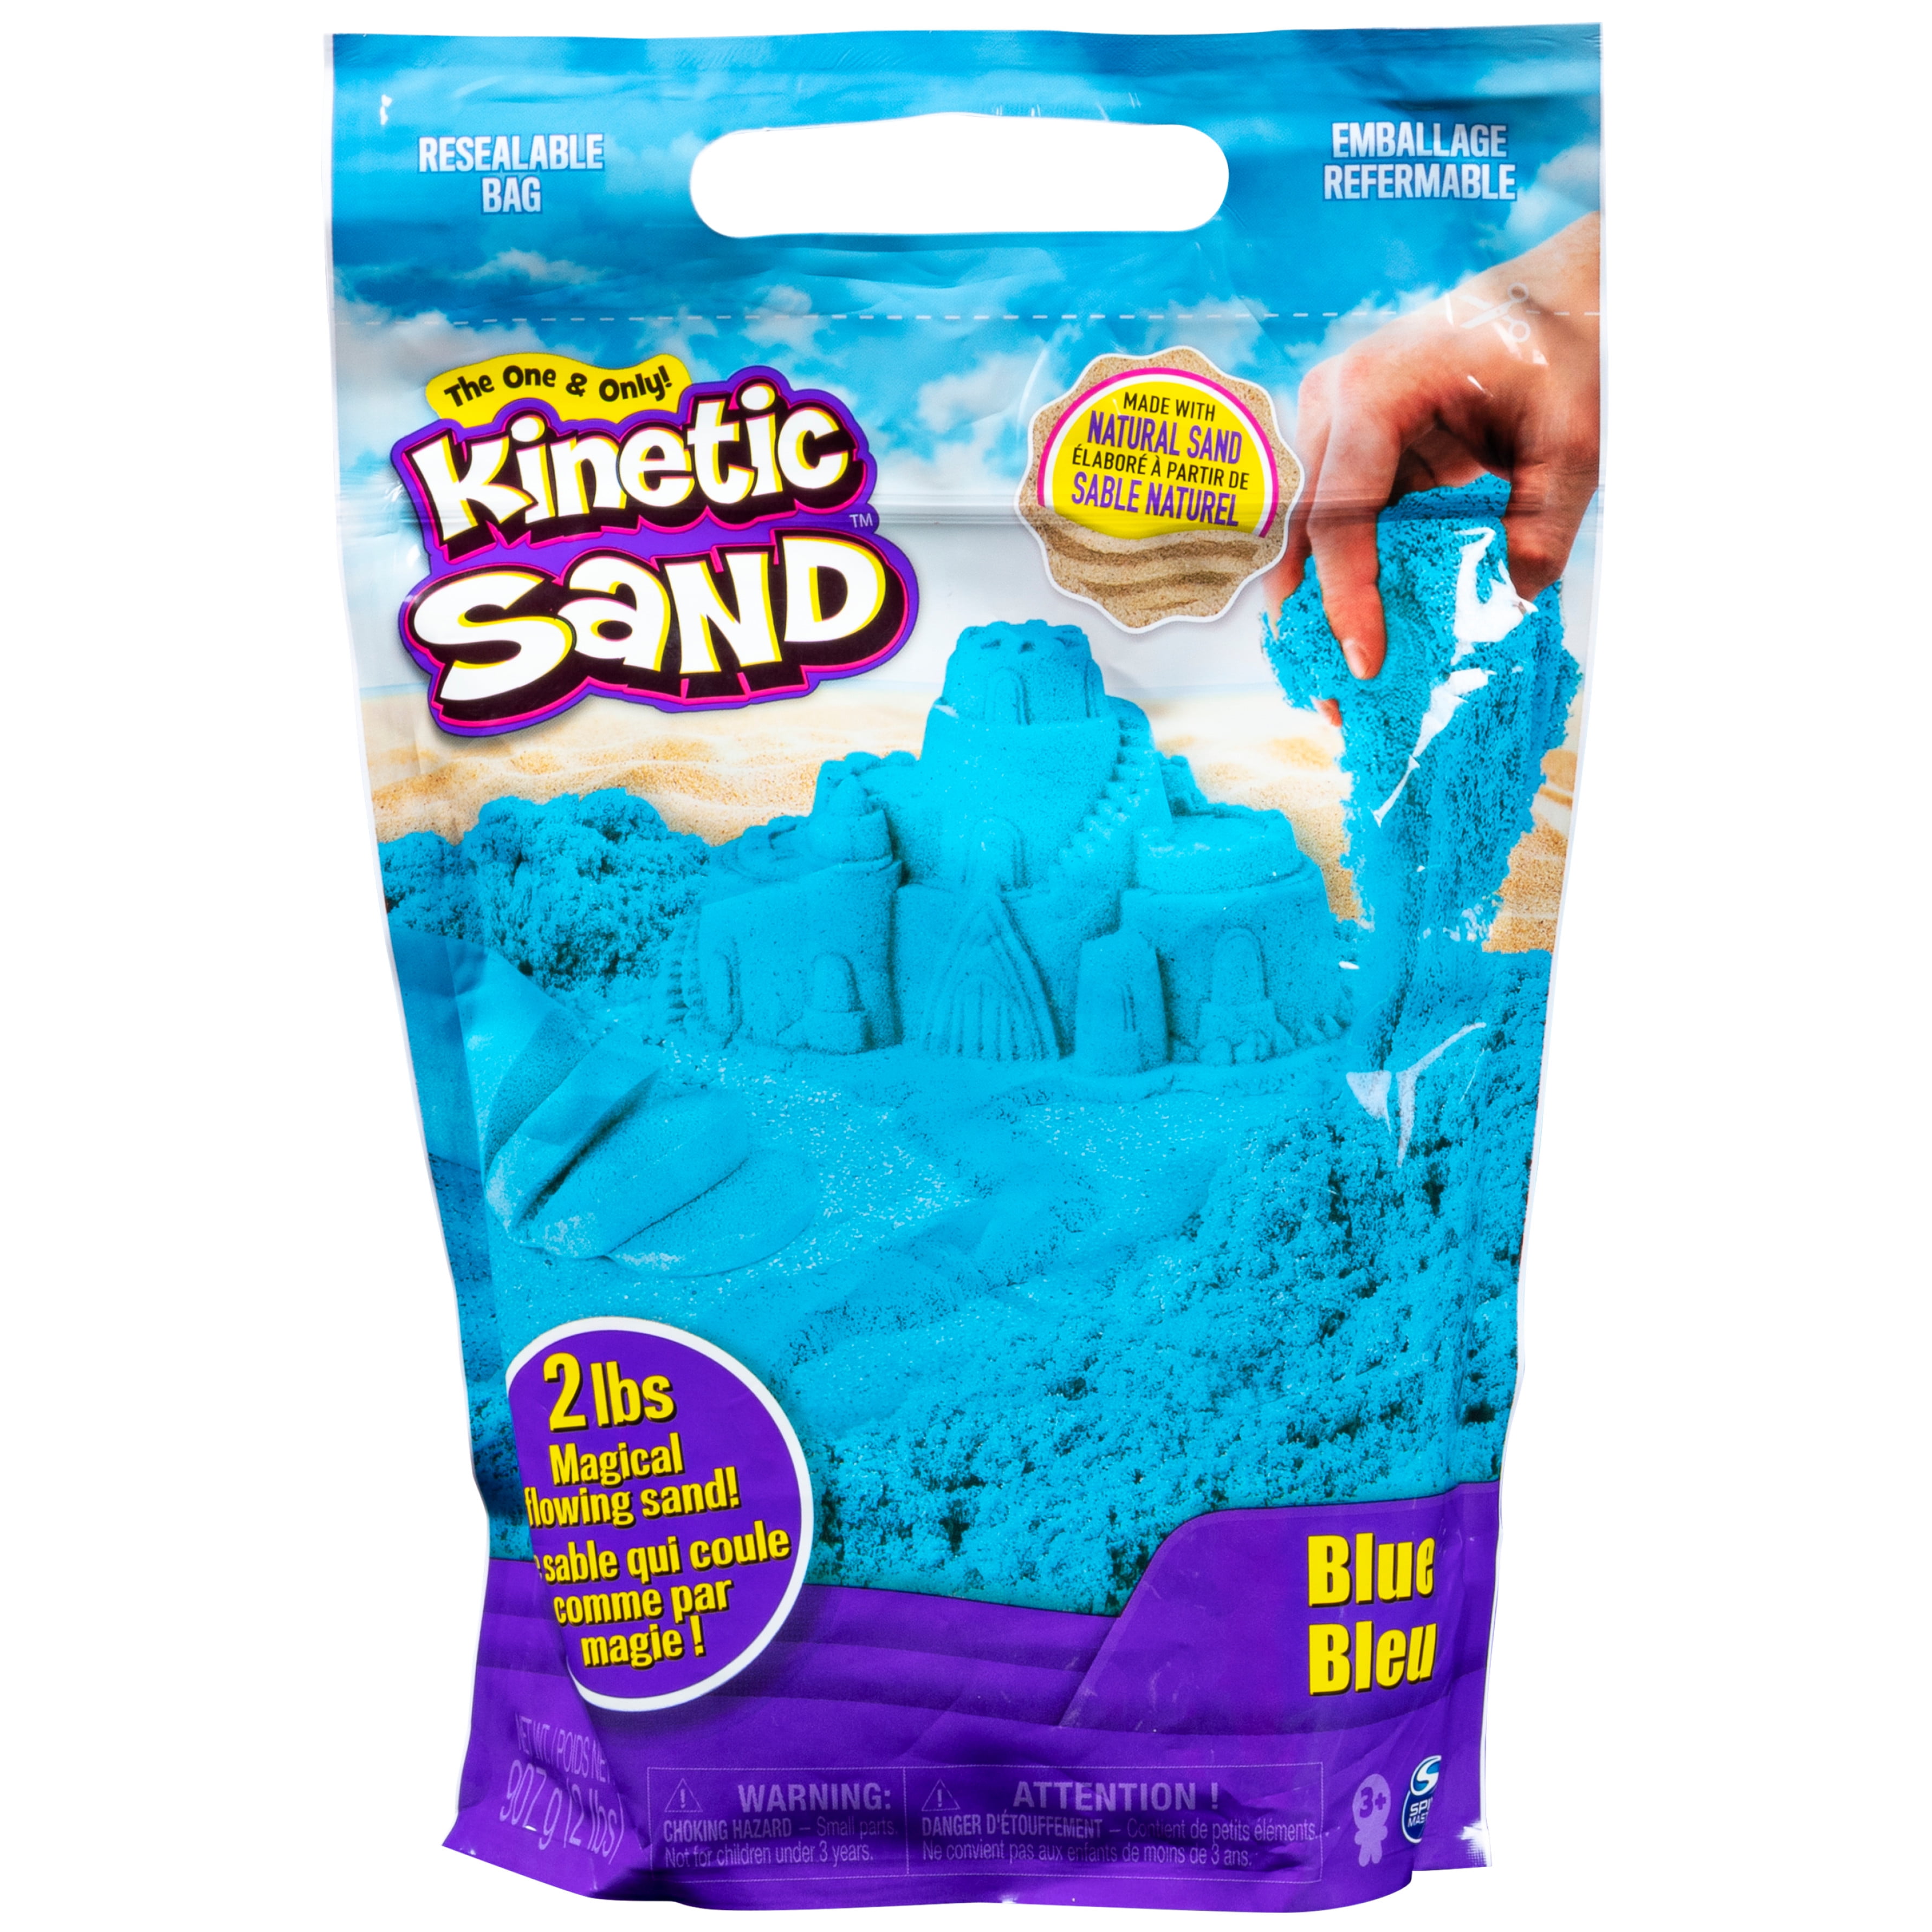 Kinetic Sand - 1 Kg  Smooth and Non-Sticky Sand for Kids – Miniture